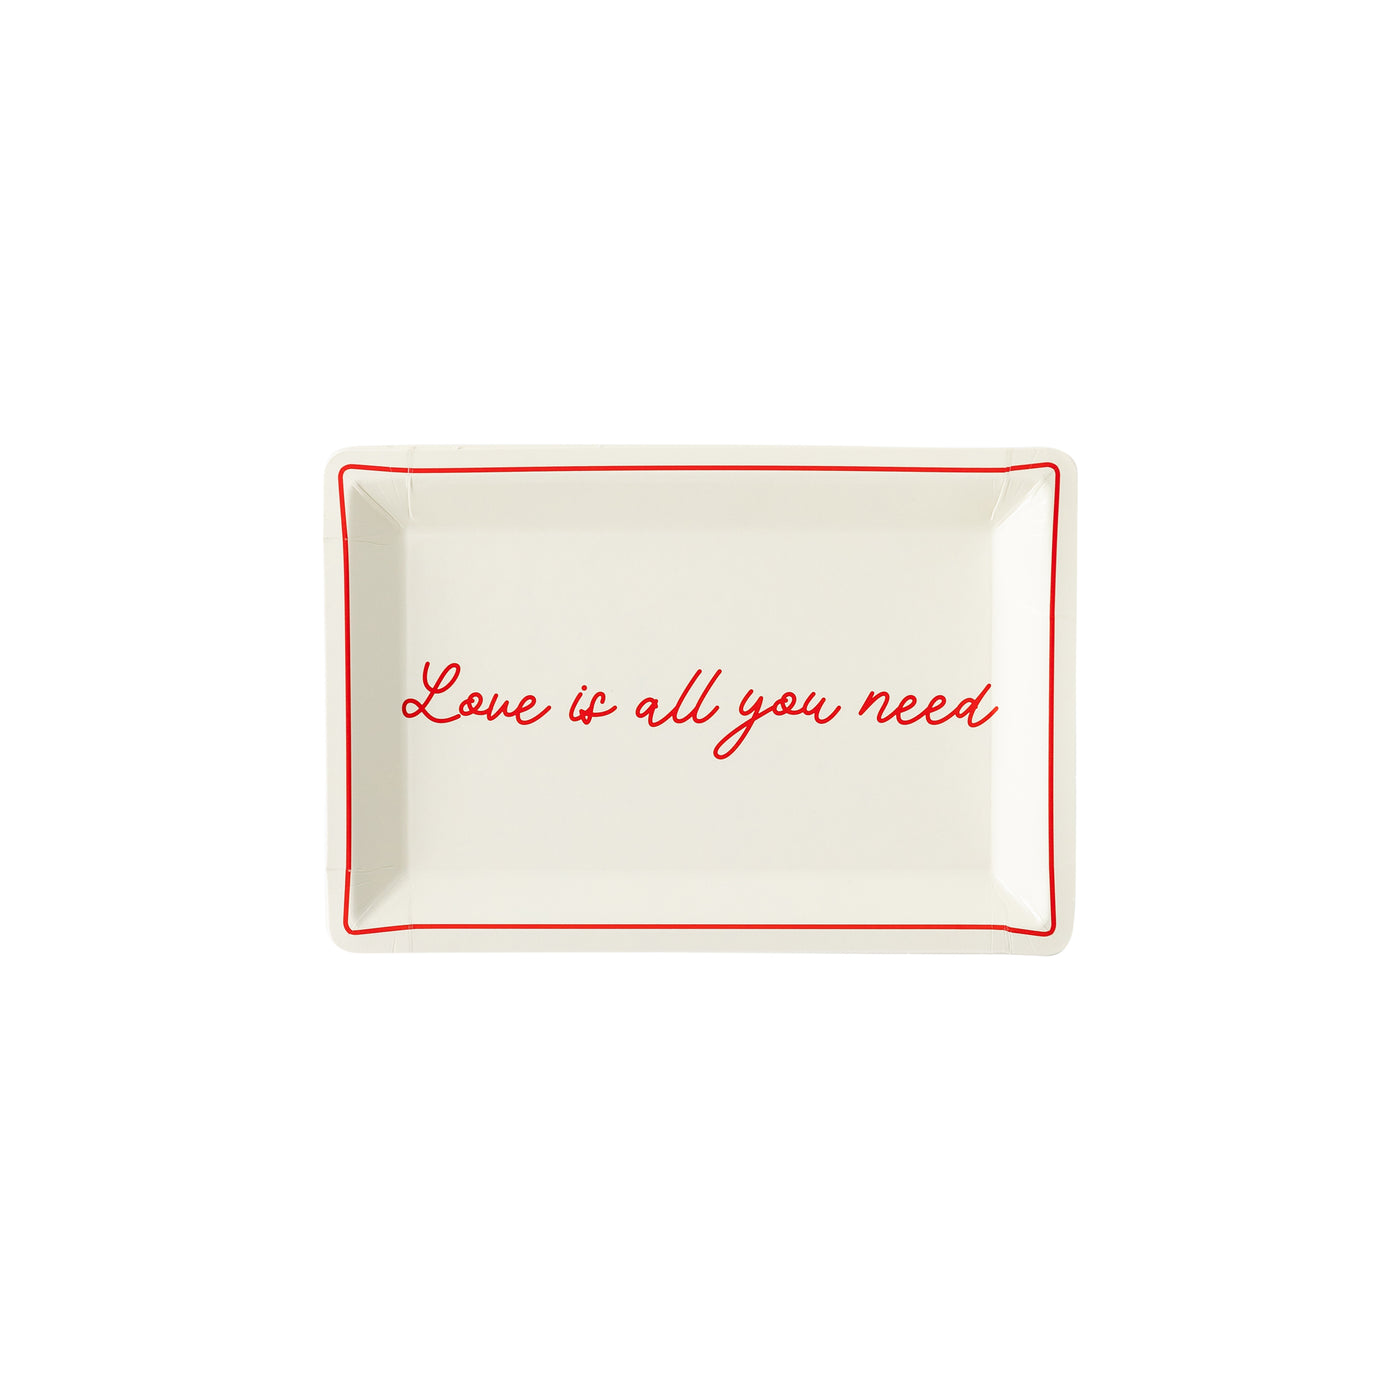 PLTS357C - Love Is All You Need Shaped Plate